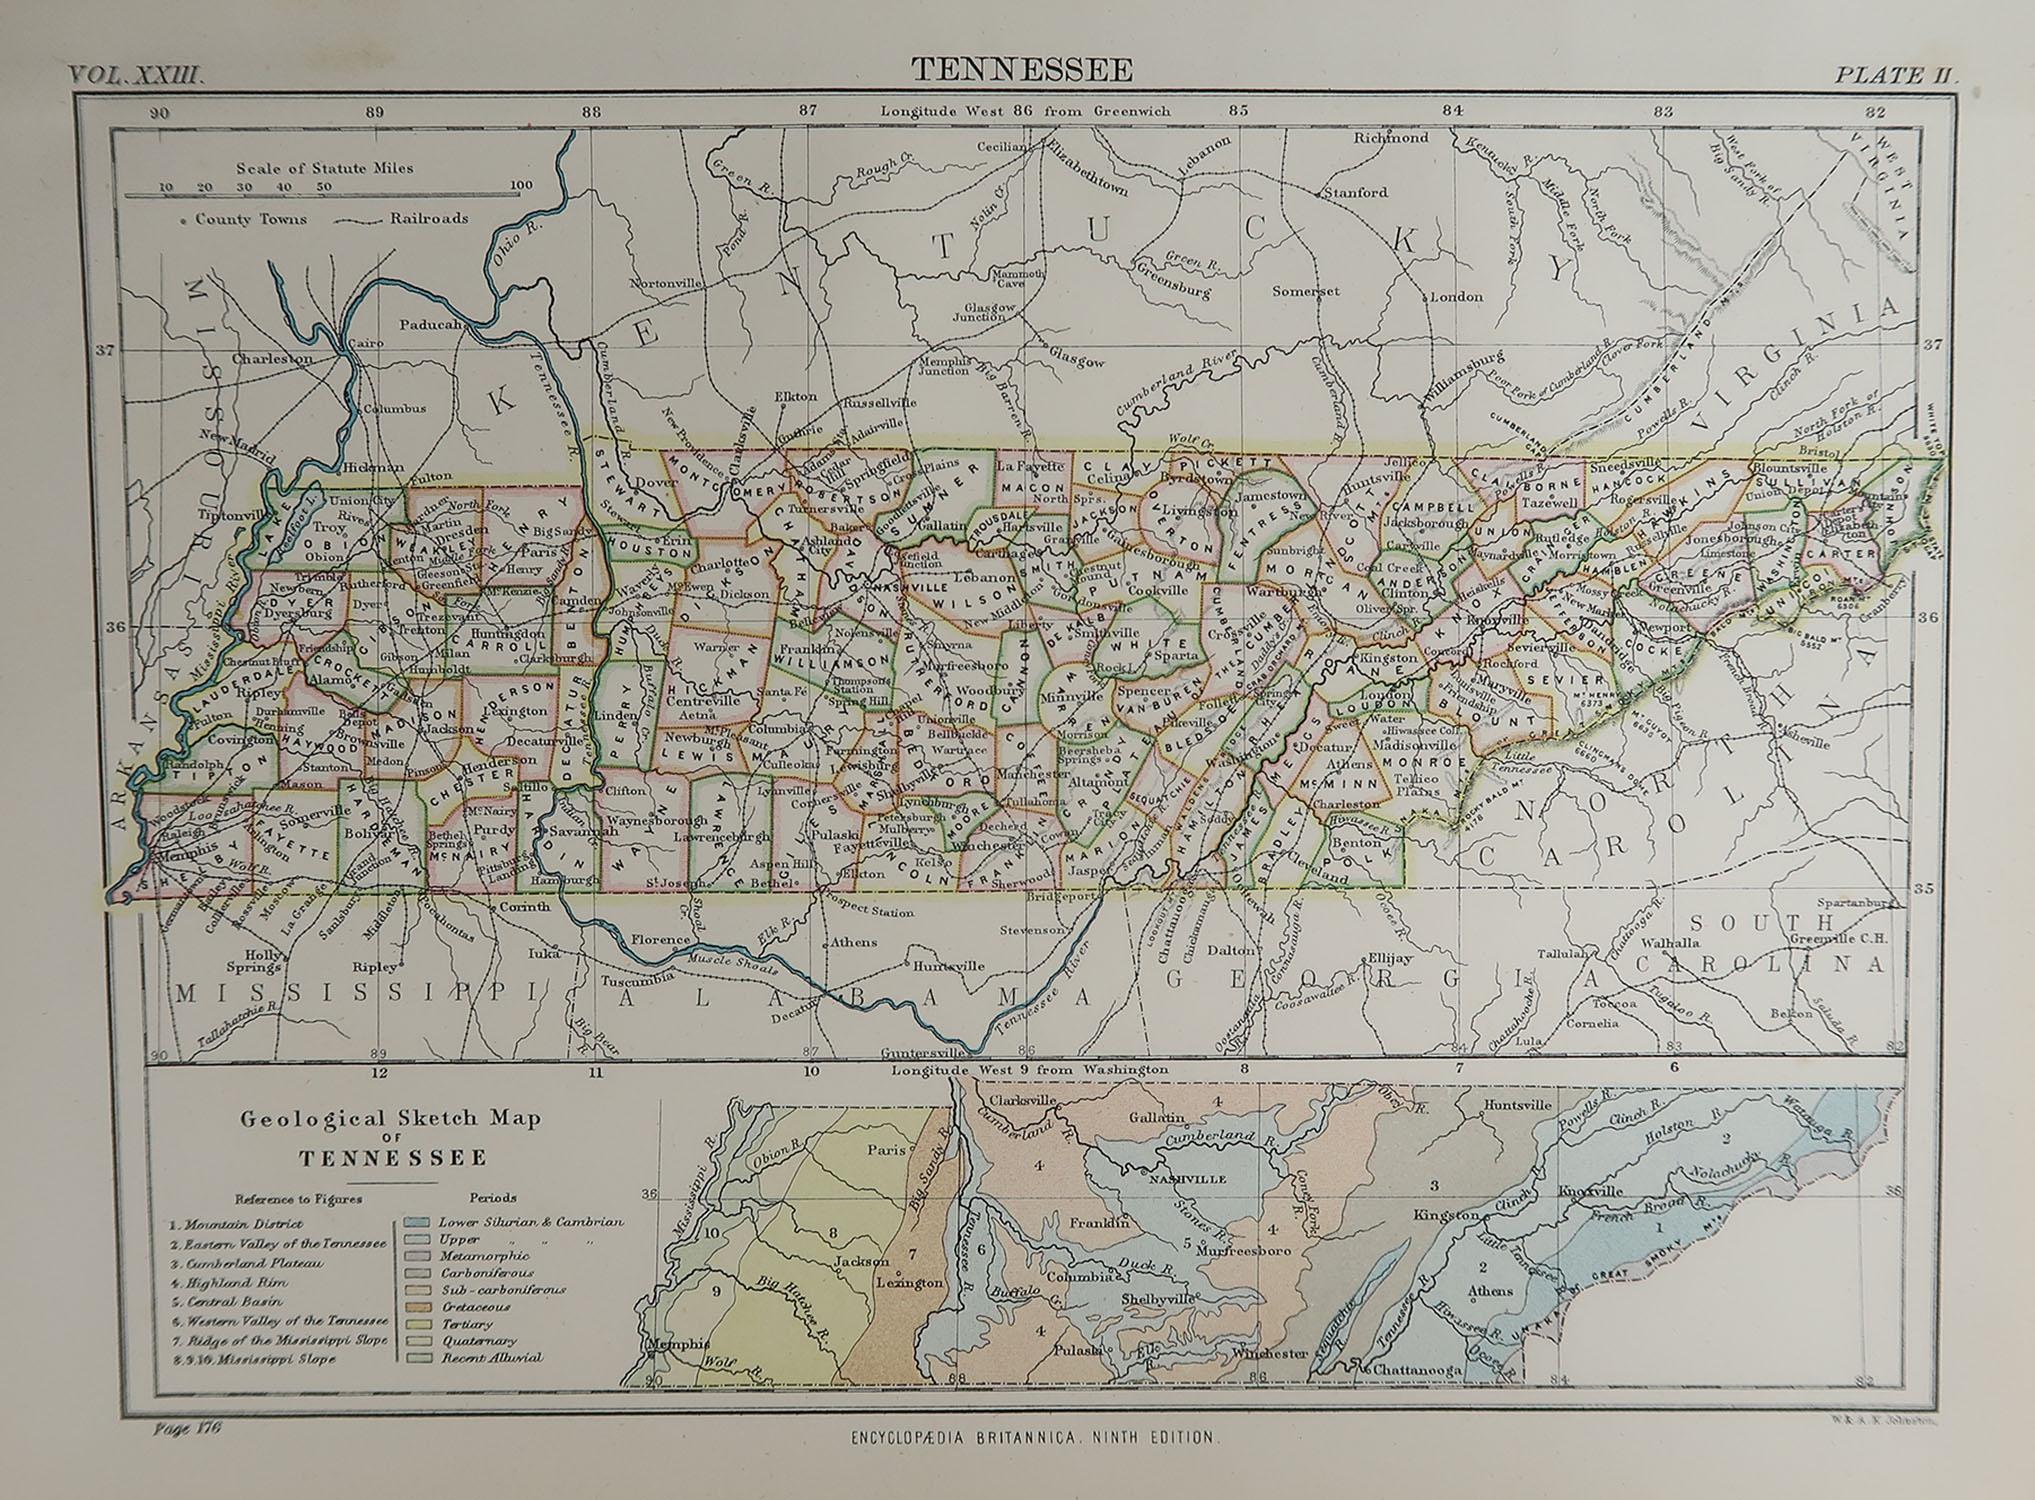 Great map of Tennessee

Drawn and engraved by W. & A.K. Johnston

Published By A & C Black, Edinburgh.

Original colour

Unframed.








 